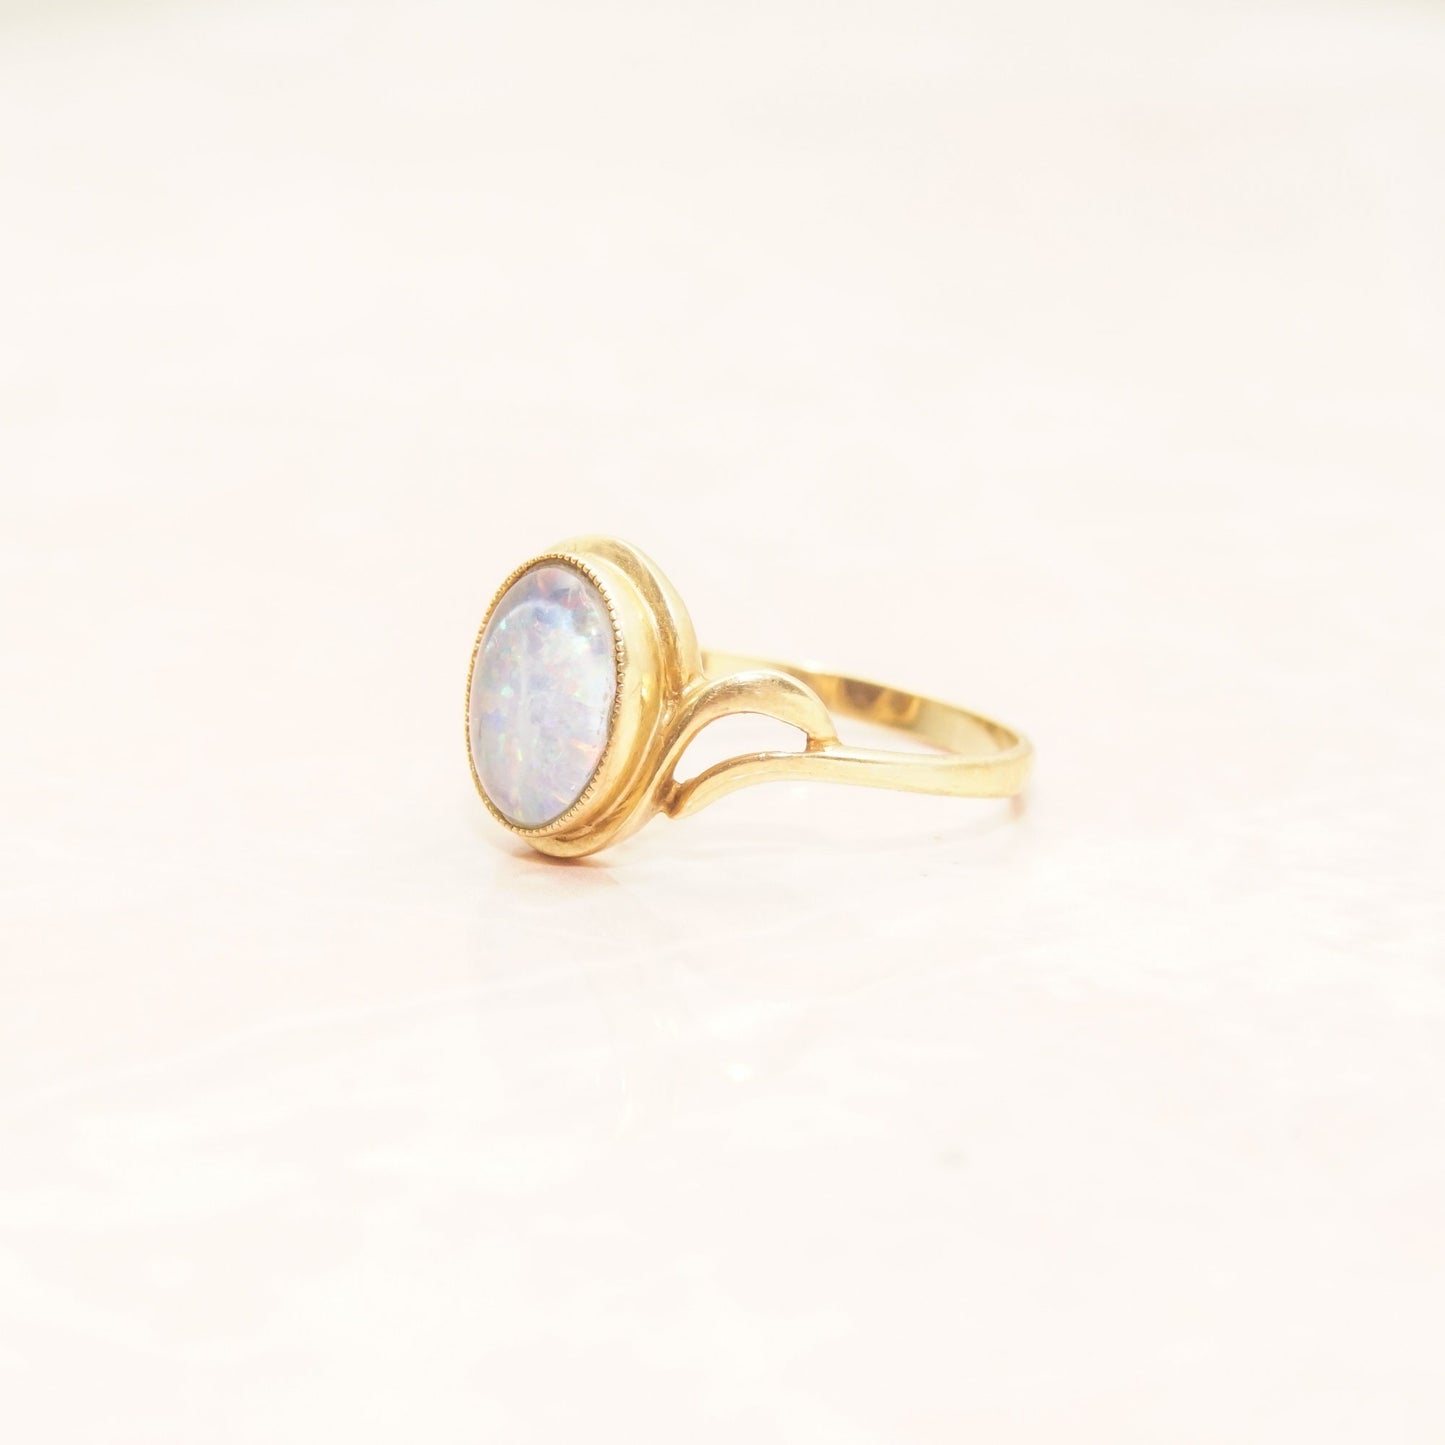 10K yellow gold cocktail ring with oval opal triplet center stone, elegant bypass design shank, estate jewelry, perfect October birthstone gift, size 8 1/4 US.